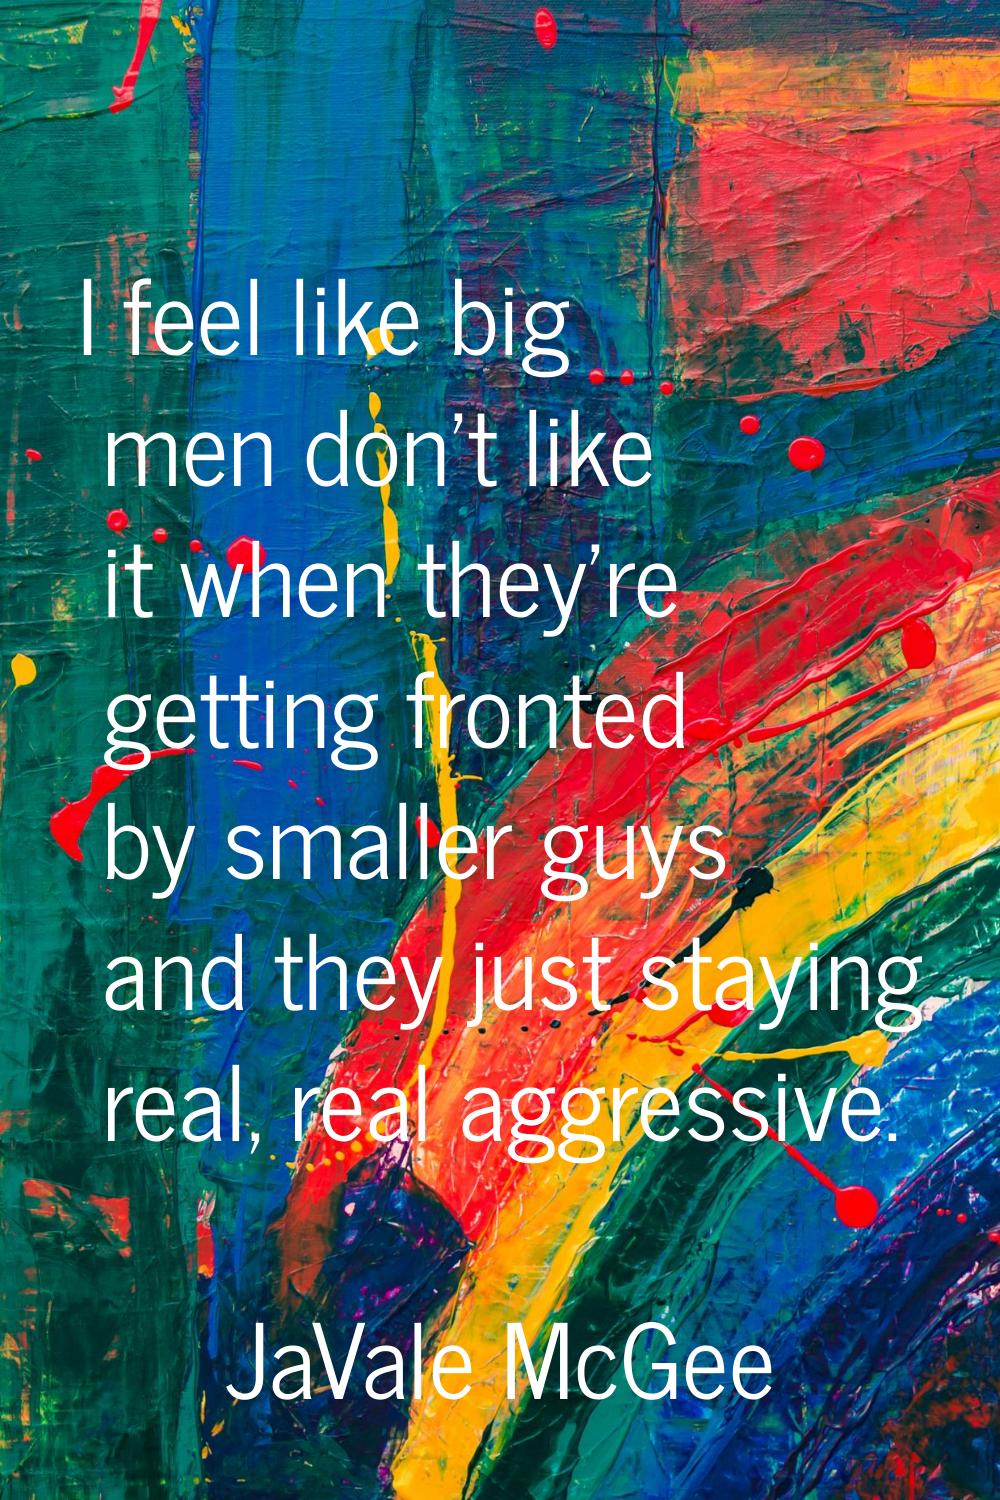 I feel like big men don't like it when they're getting fronted by smaller guys and they just stayin